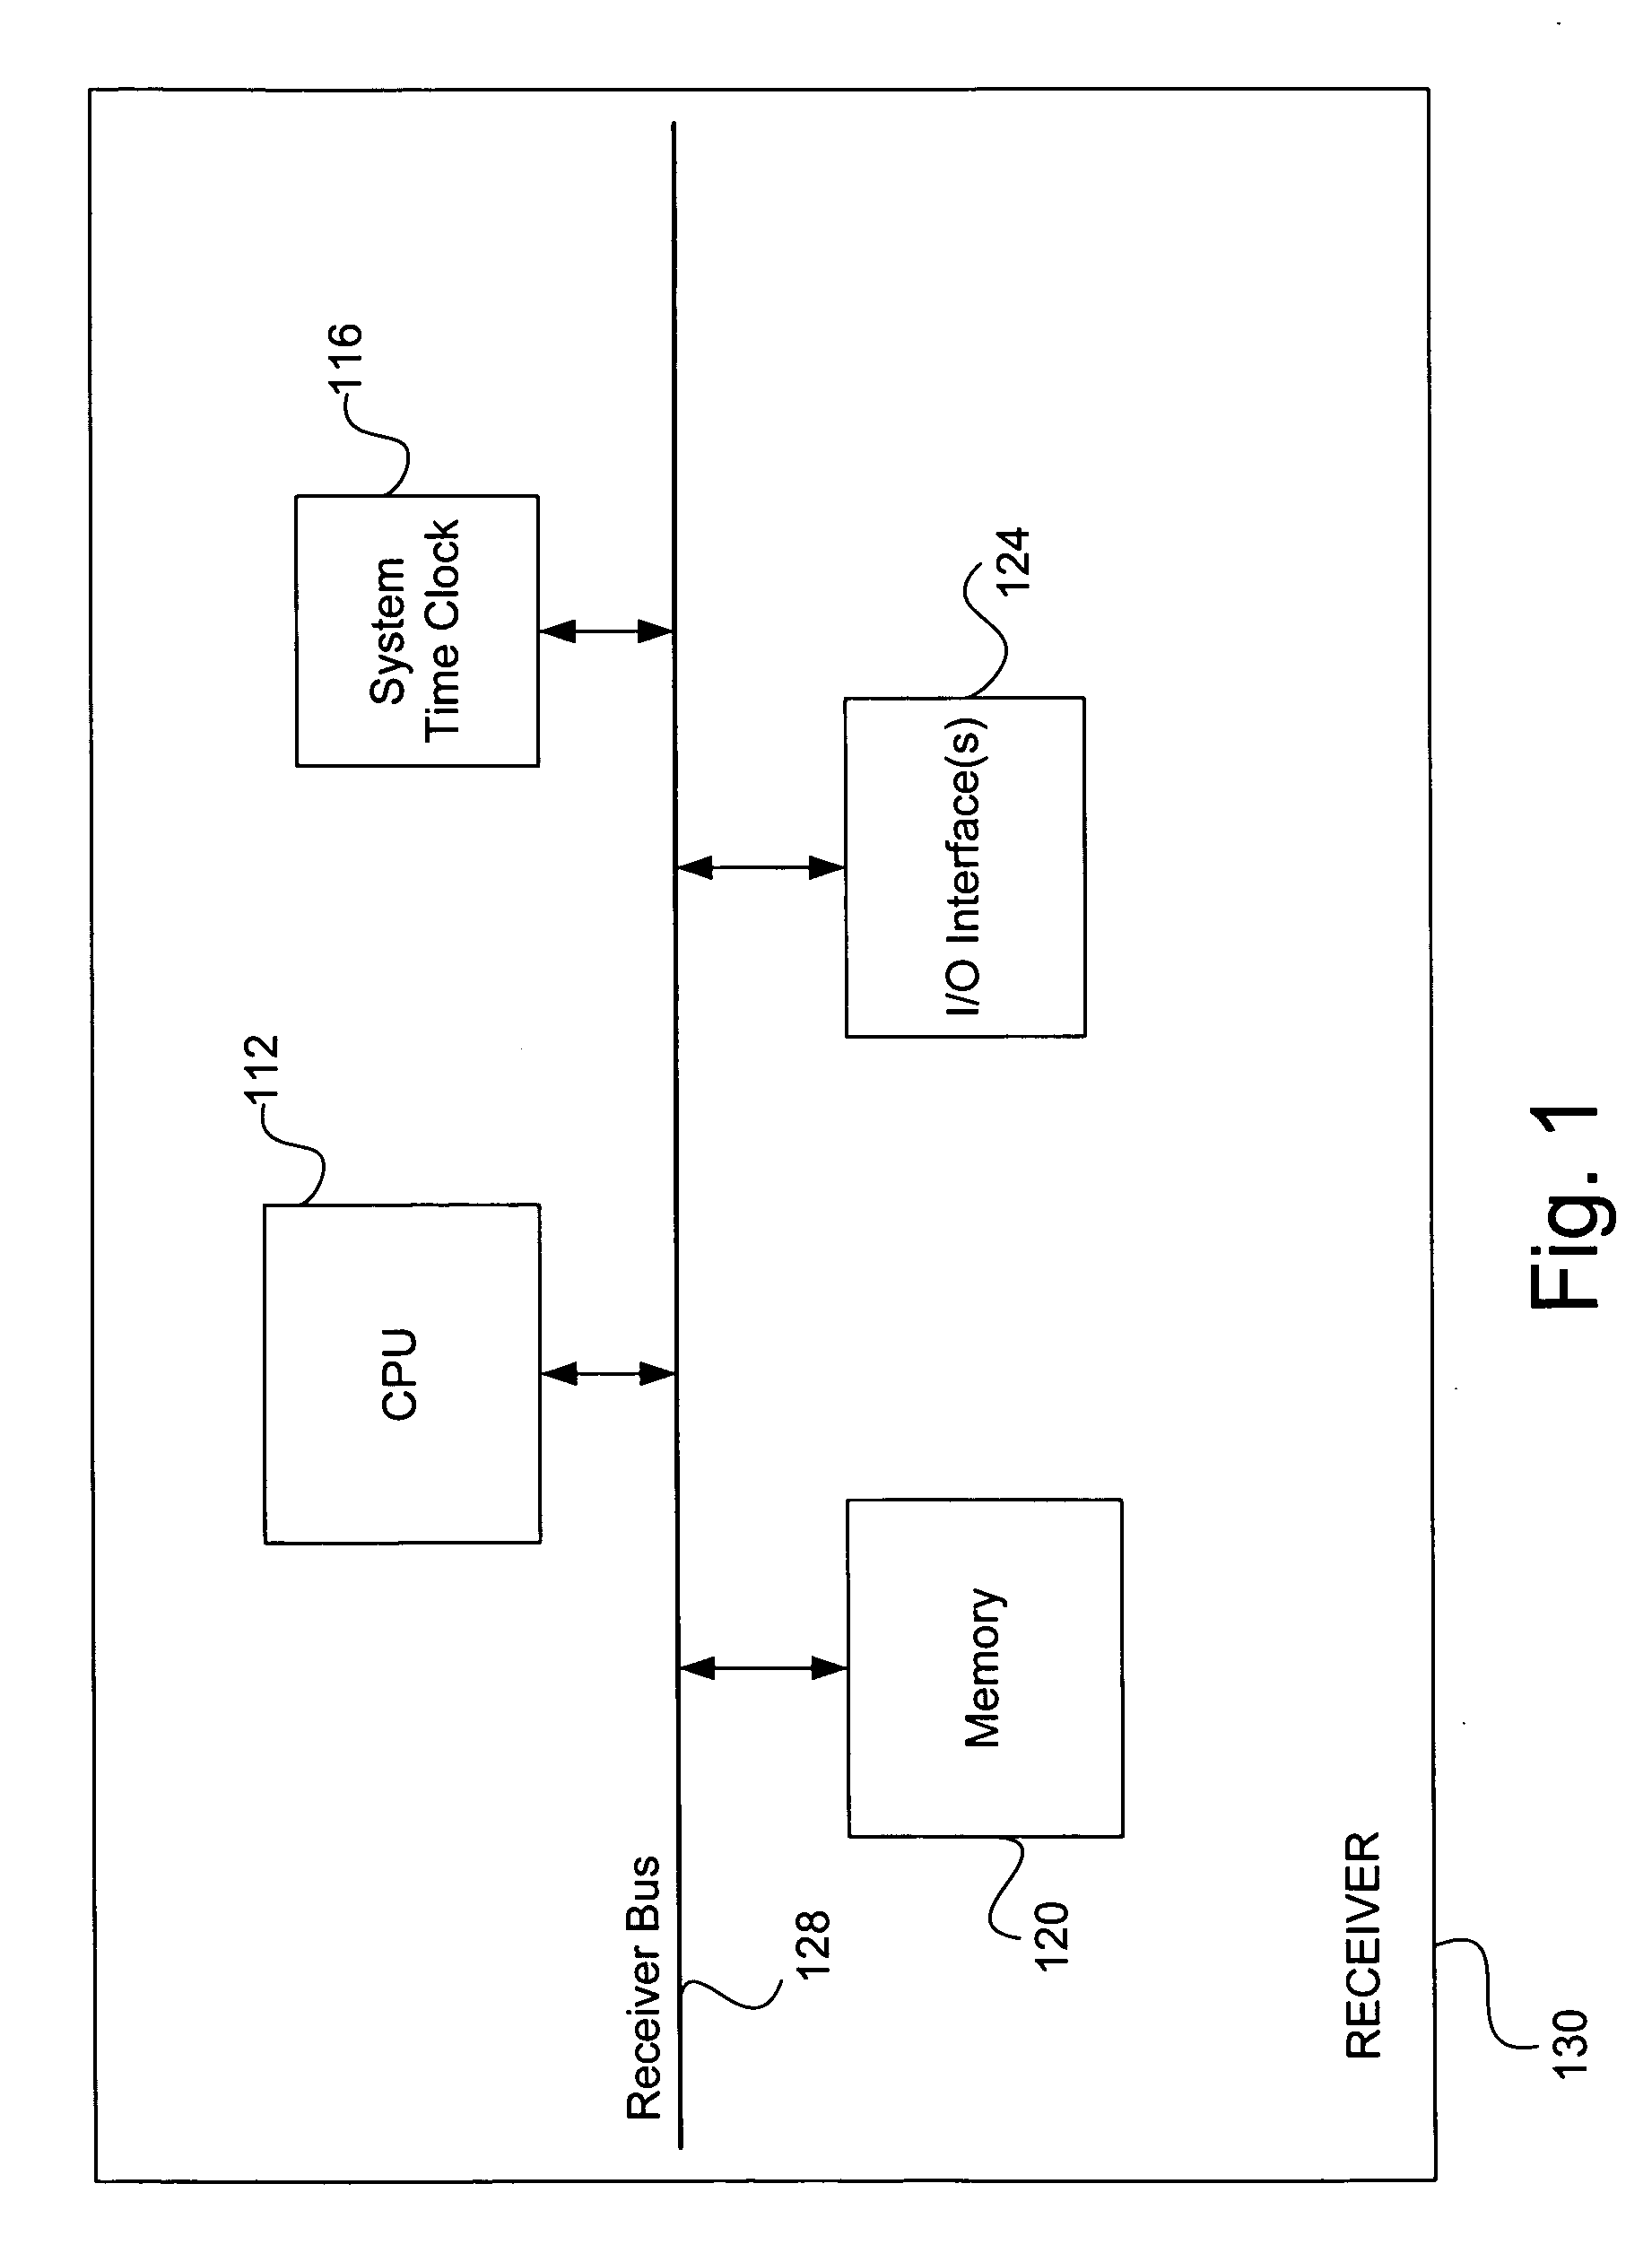 System and method for effectively performing an audio/video synchronization procedure